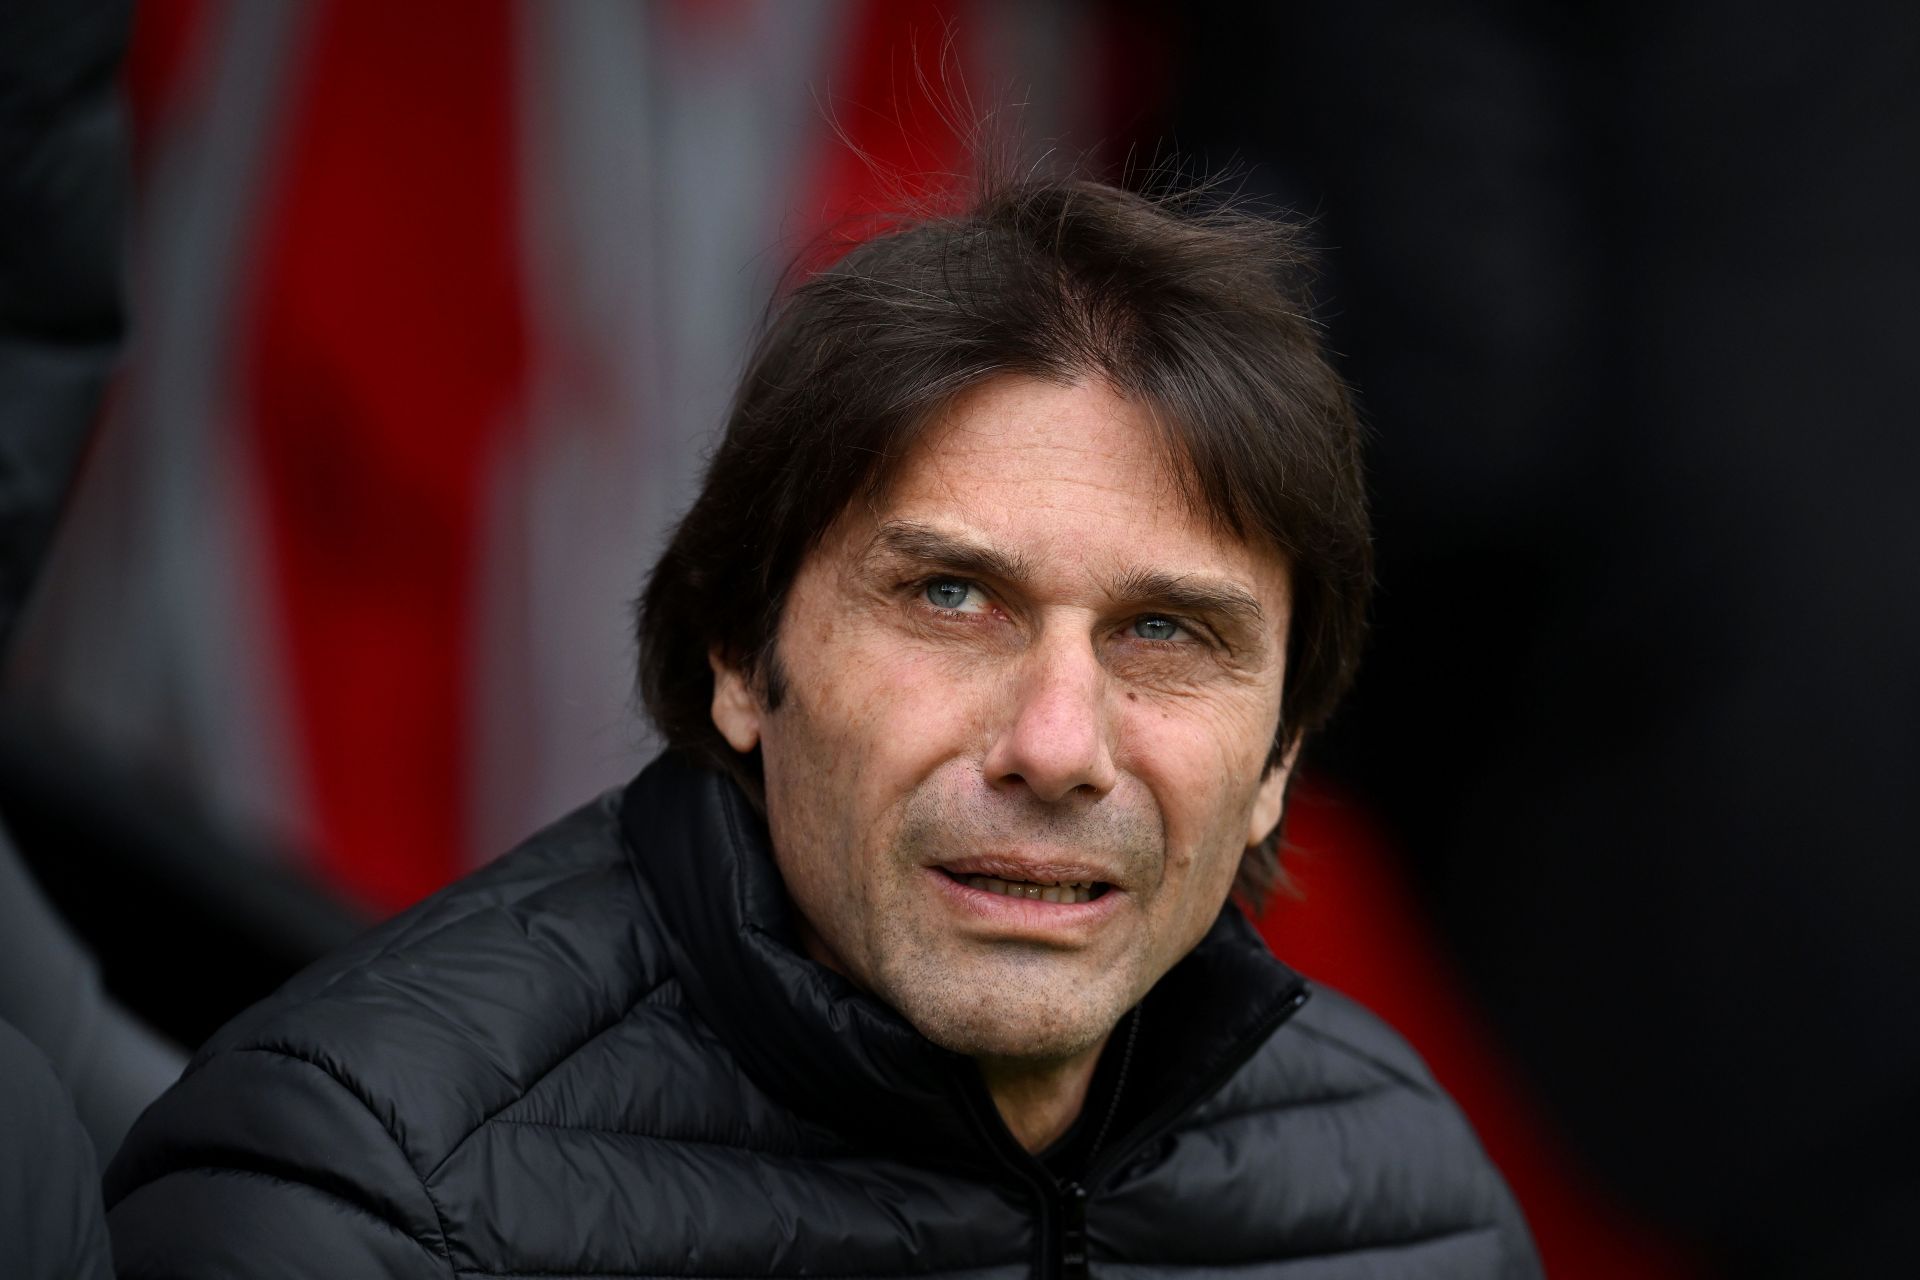 Antonio Conte could be an option to replace Erik ten Hag